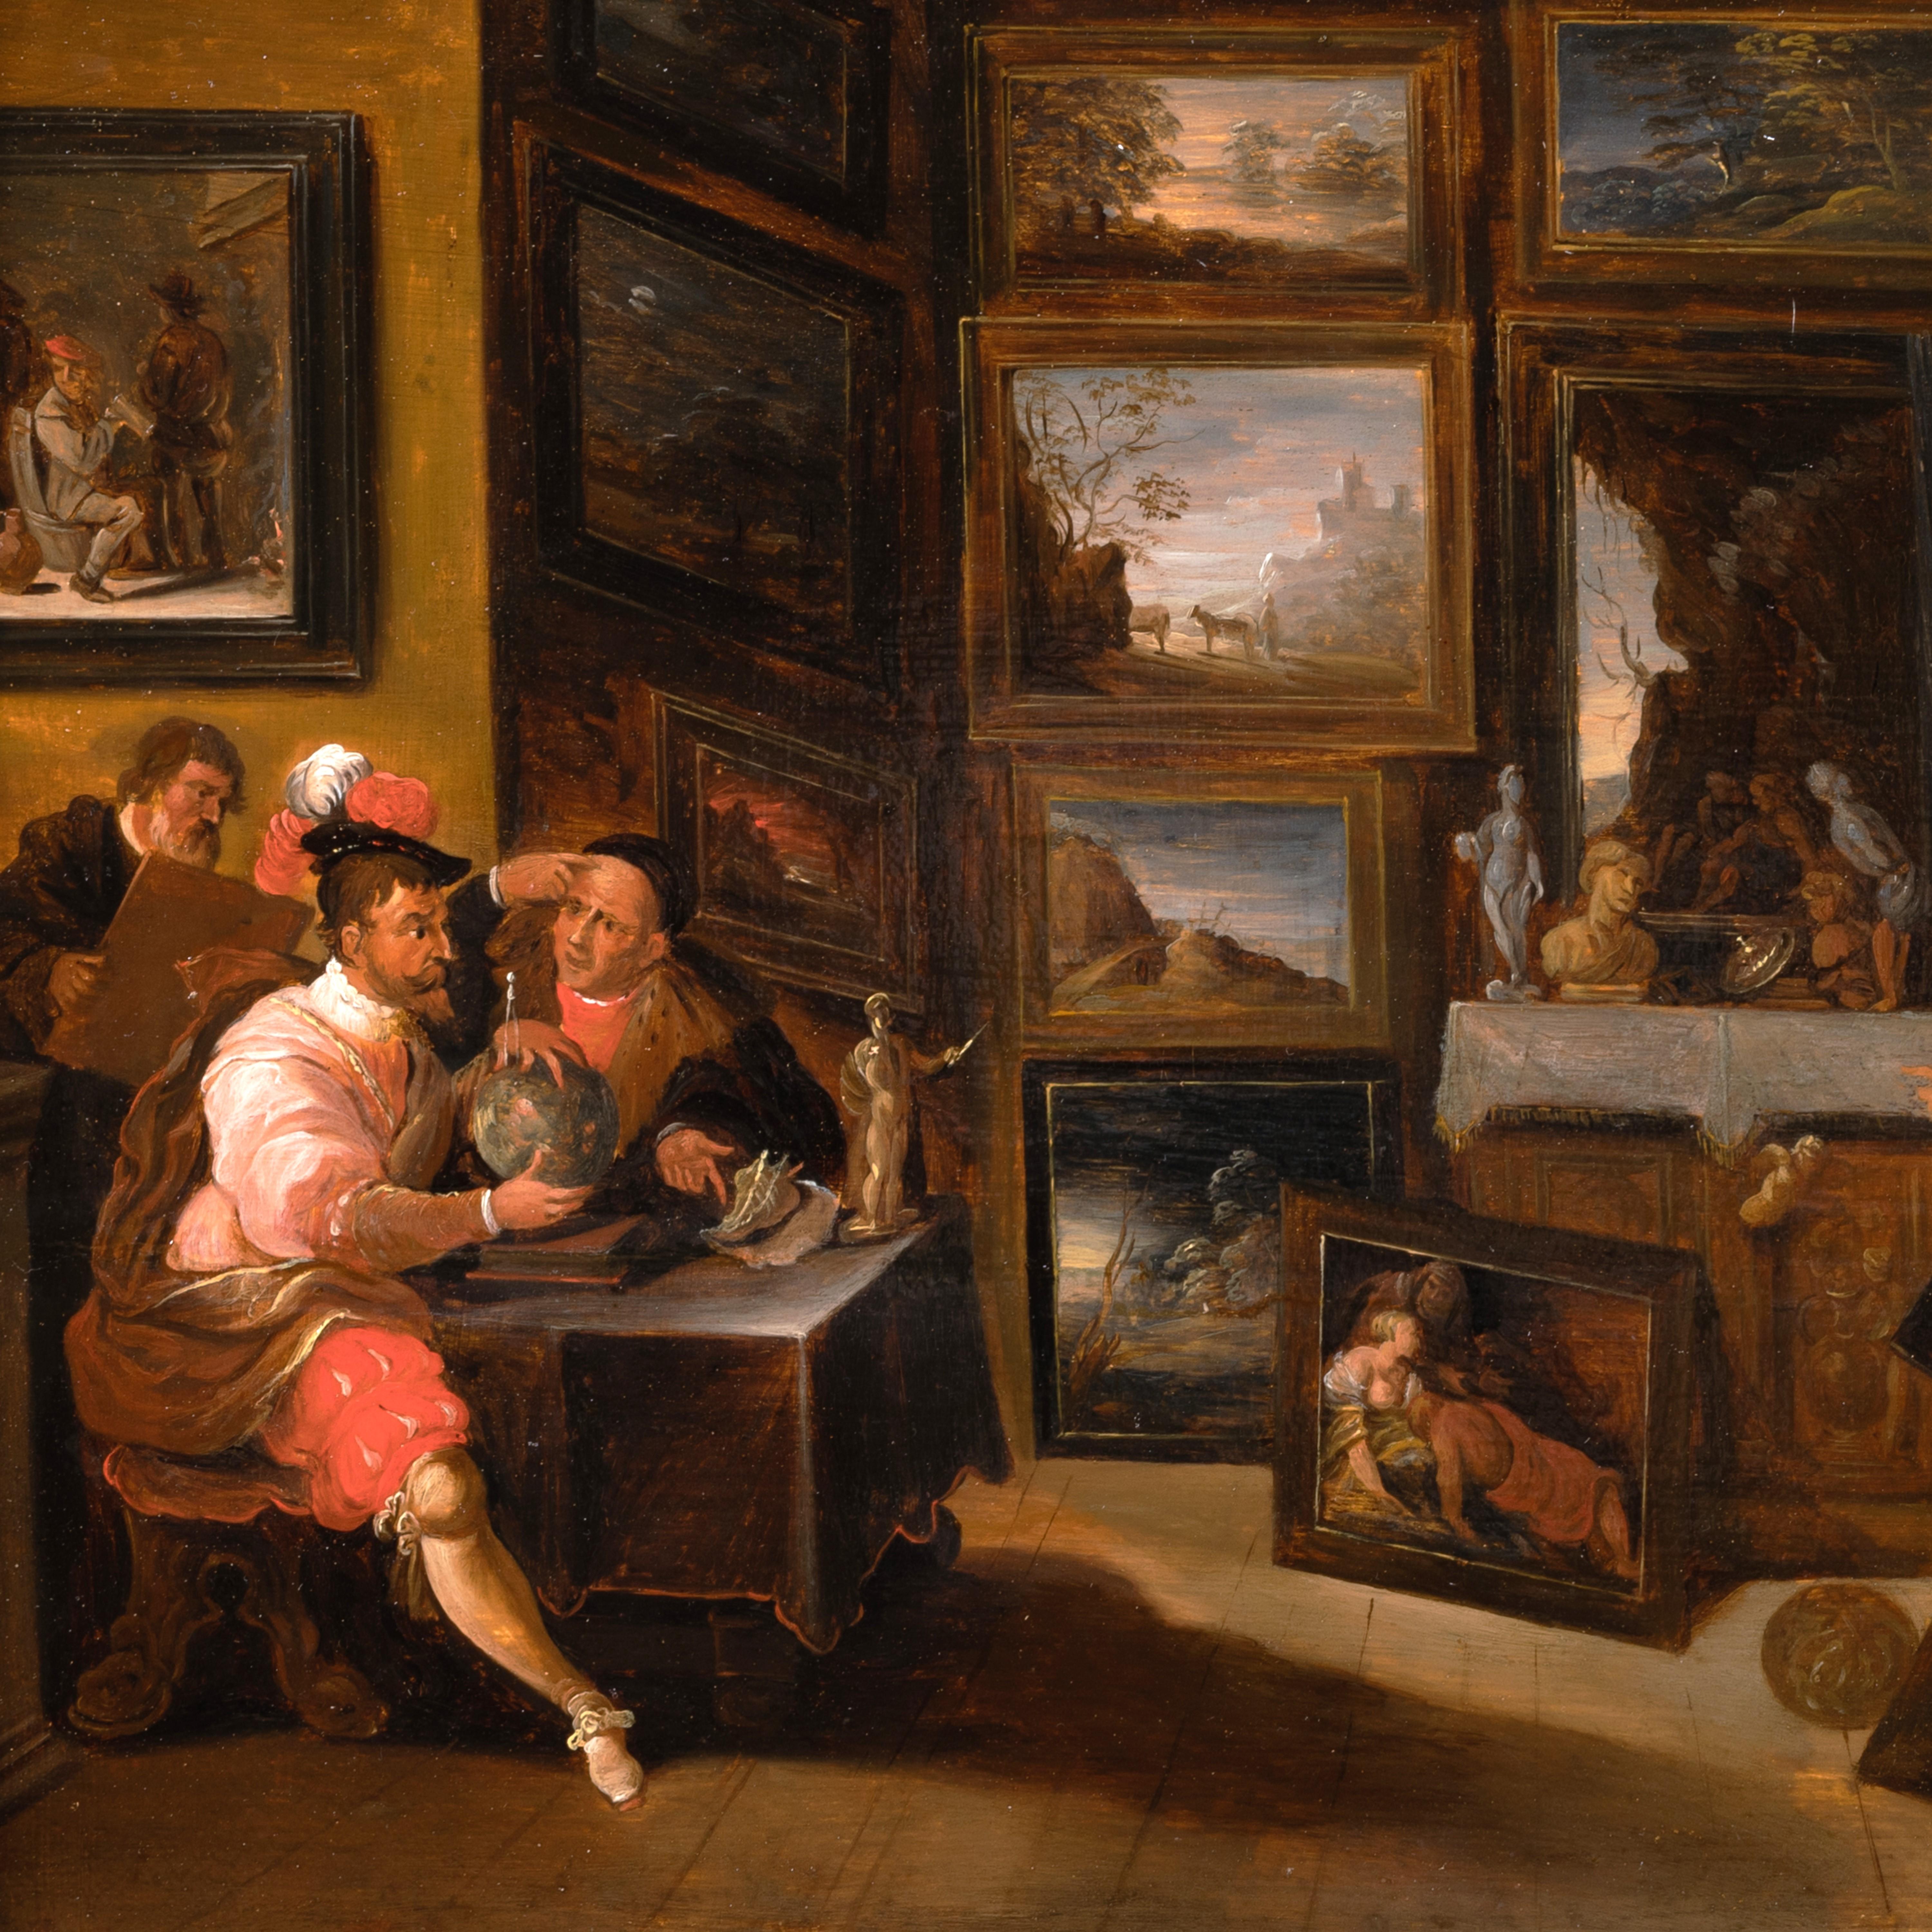 Iconoclastic donkey bursting into collector's cabinet, workshop of Frans Francken the Younger
Our panel illustrates a theme of 